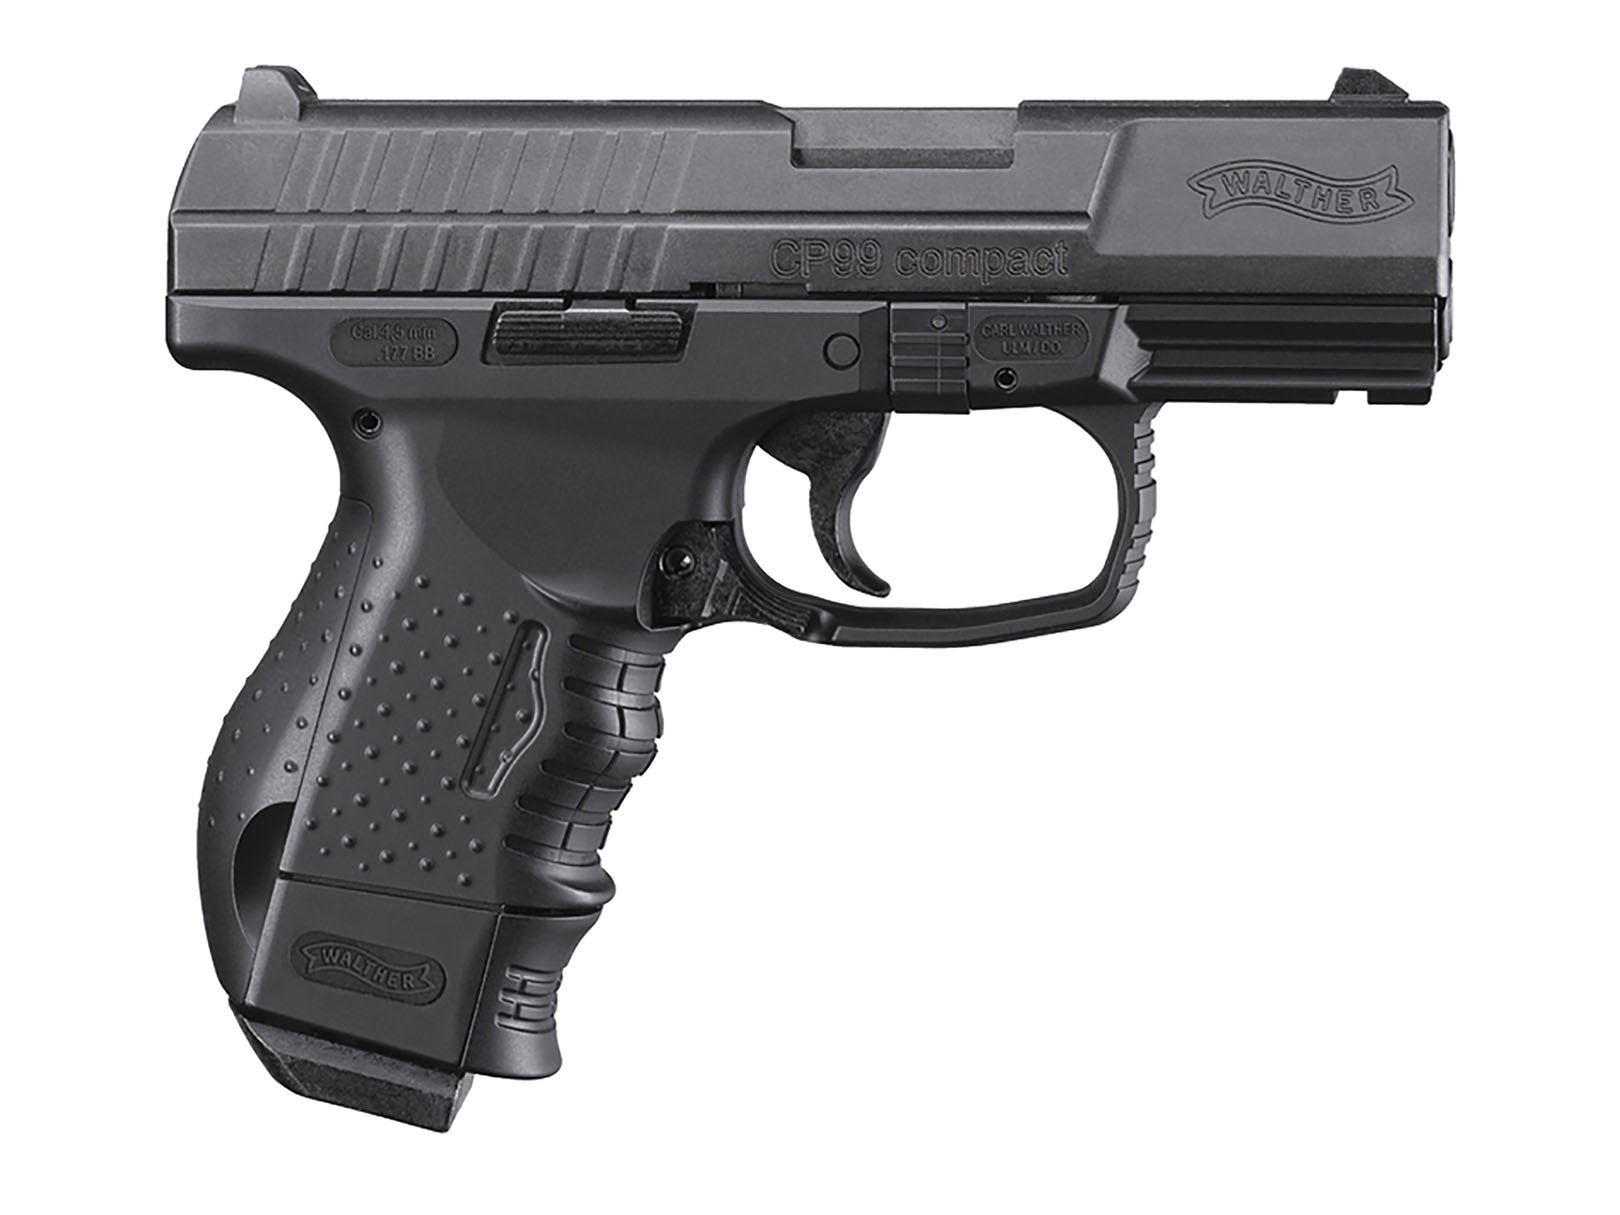 Pistola Walther CP99 Compact CO2 .177 Blowback